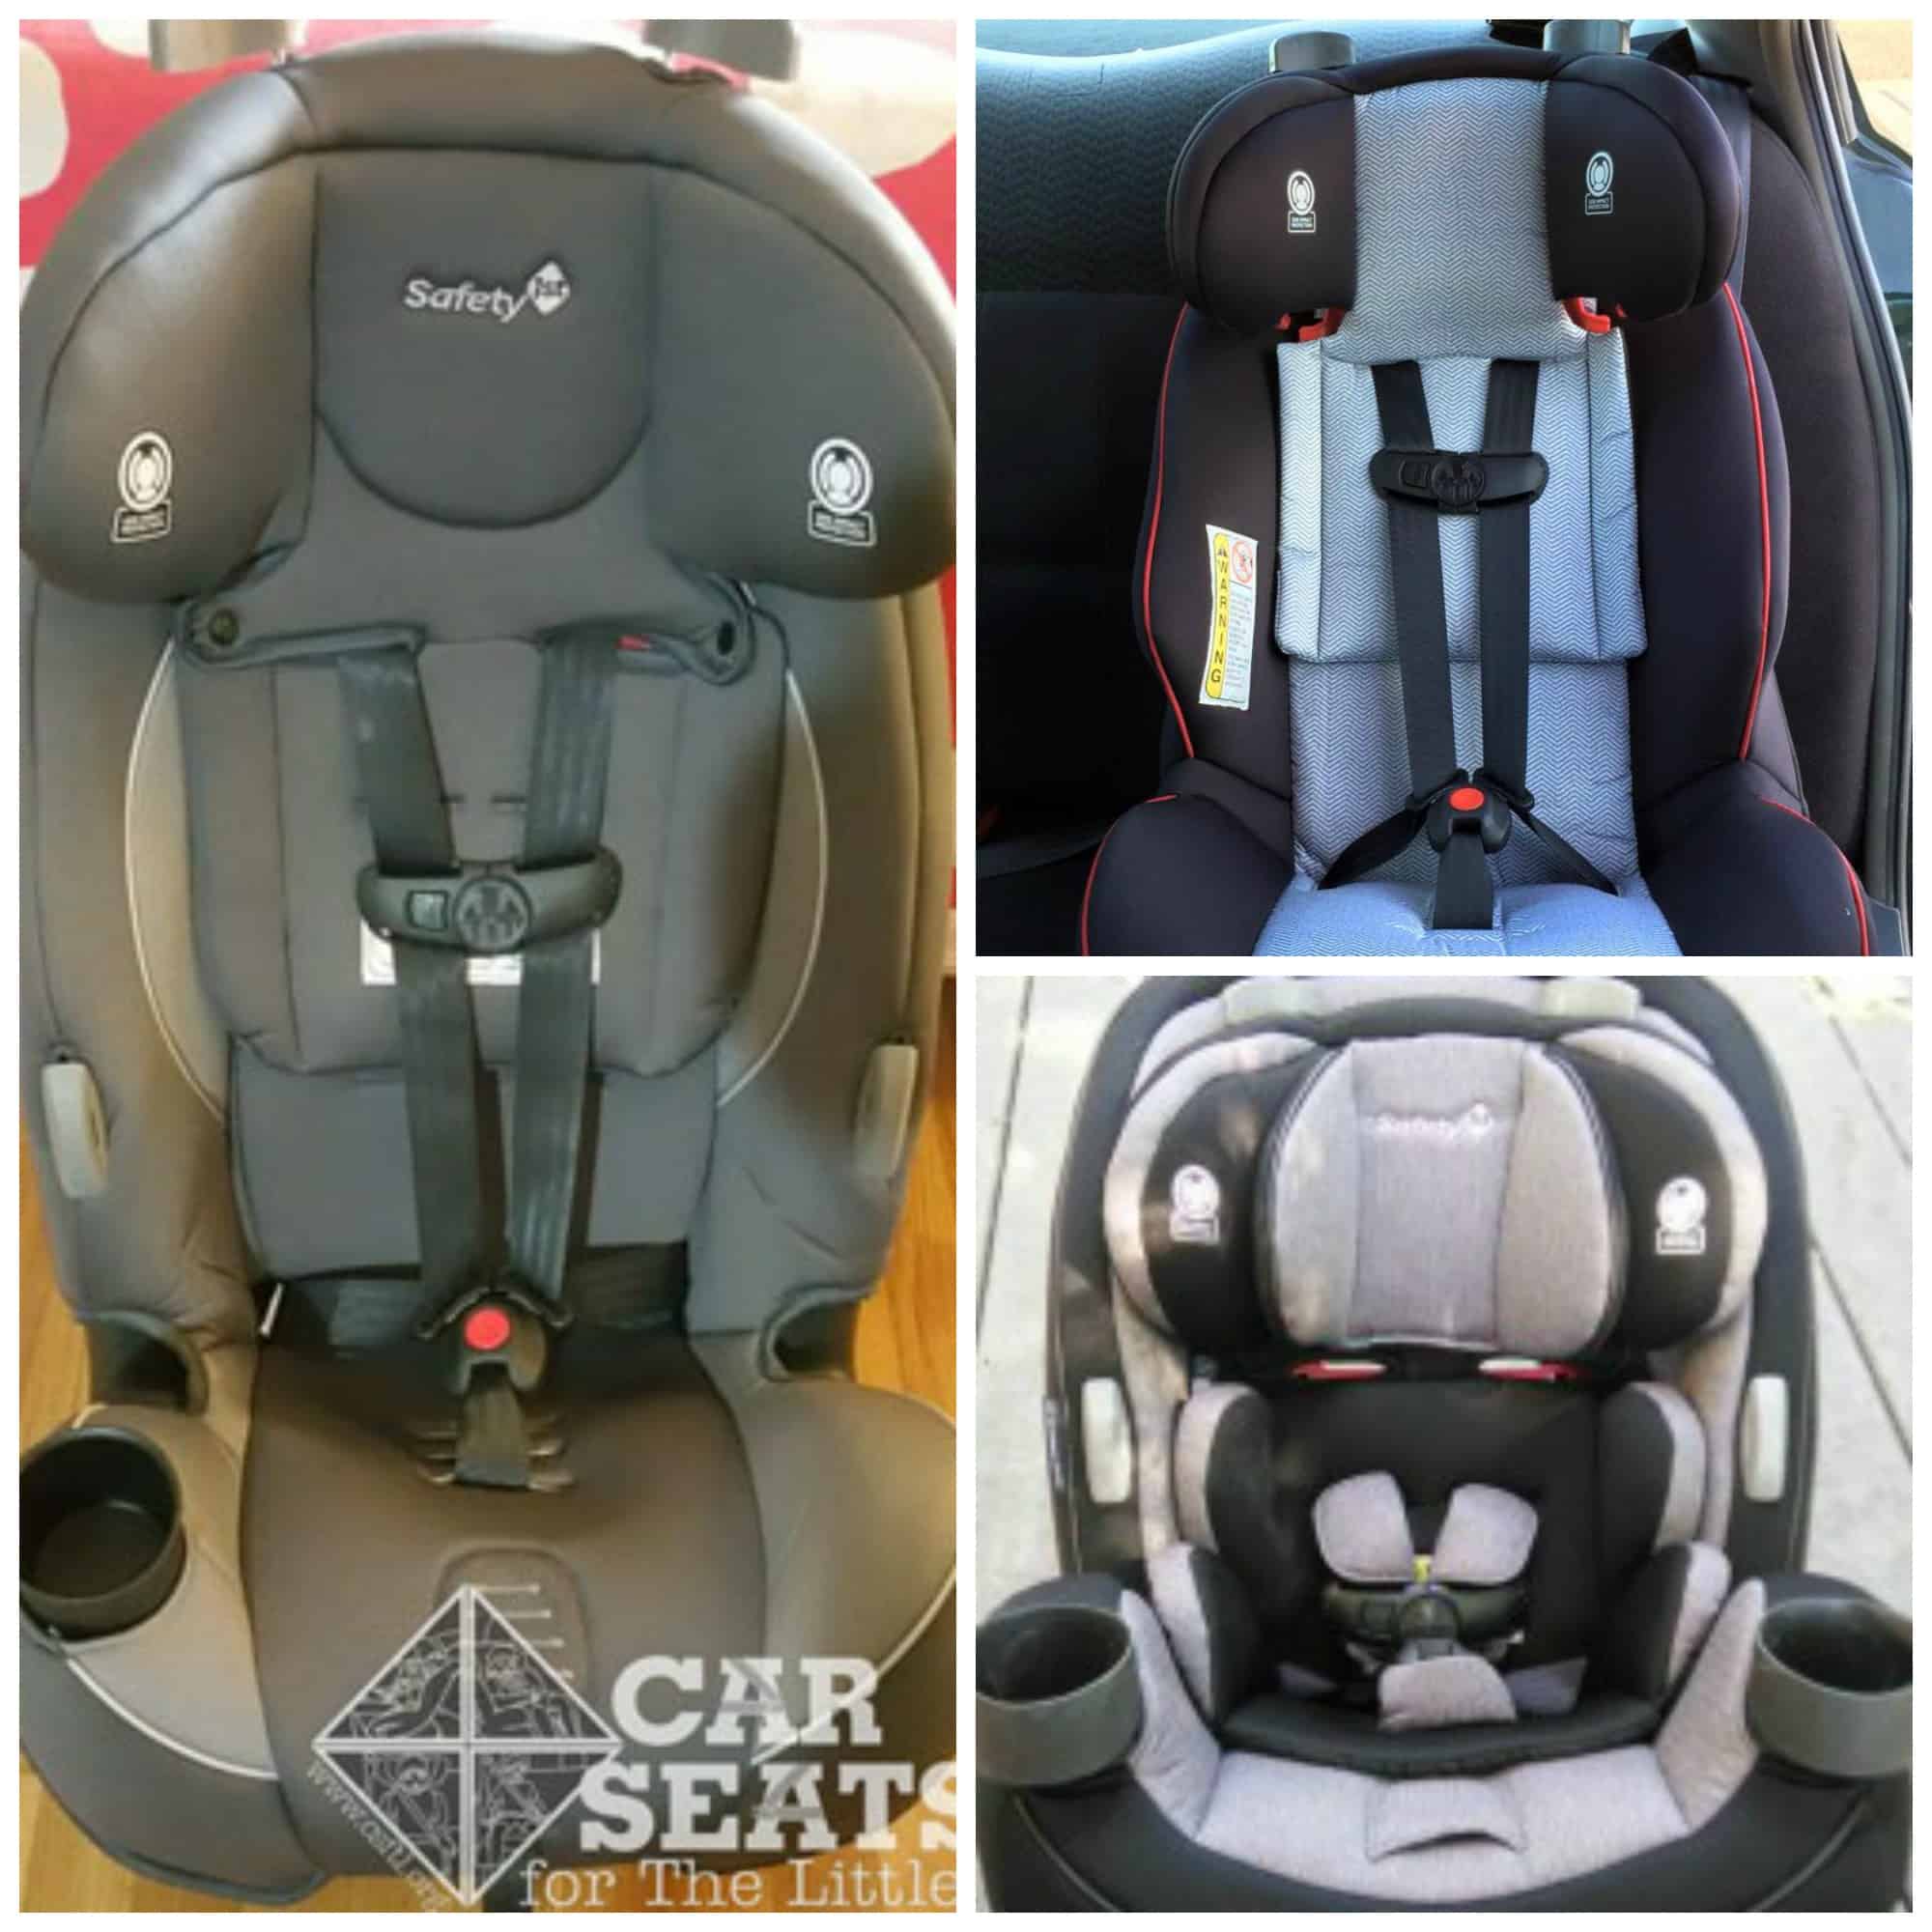 Cosco/Safety 1st Convertible Car Seat 